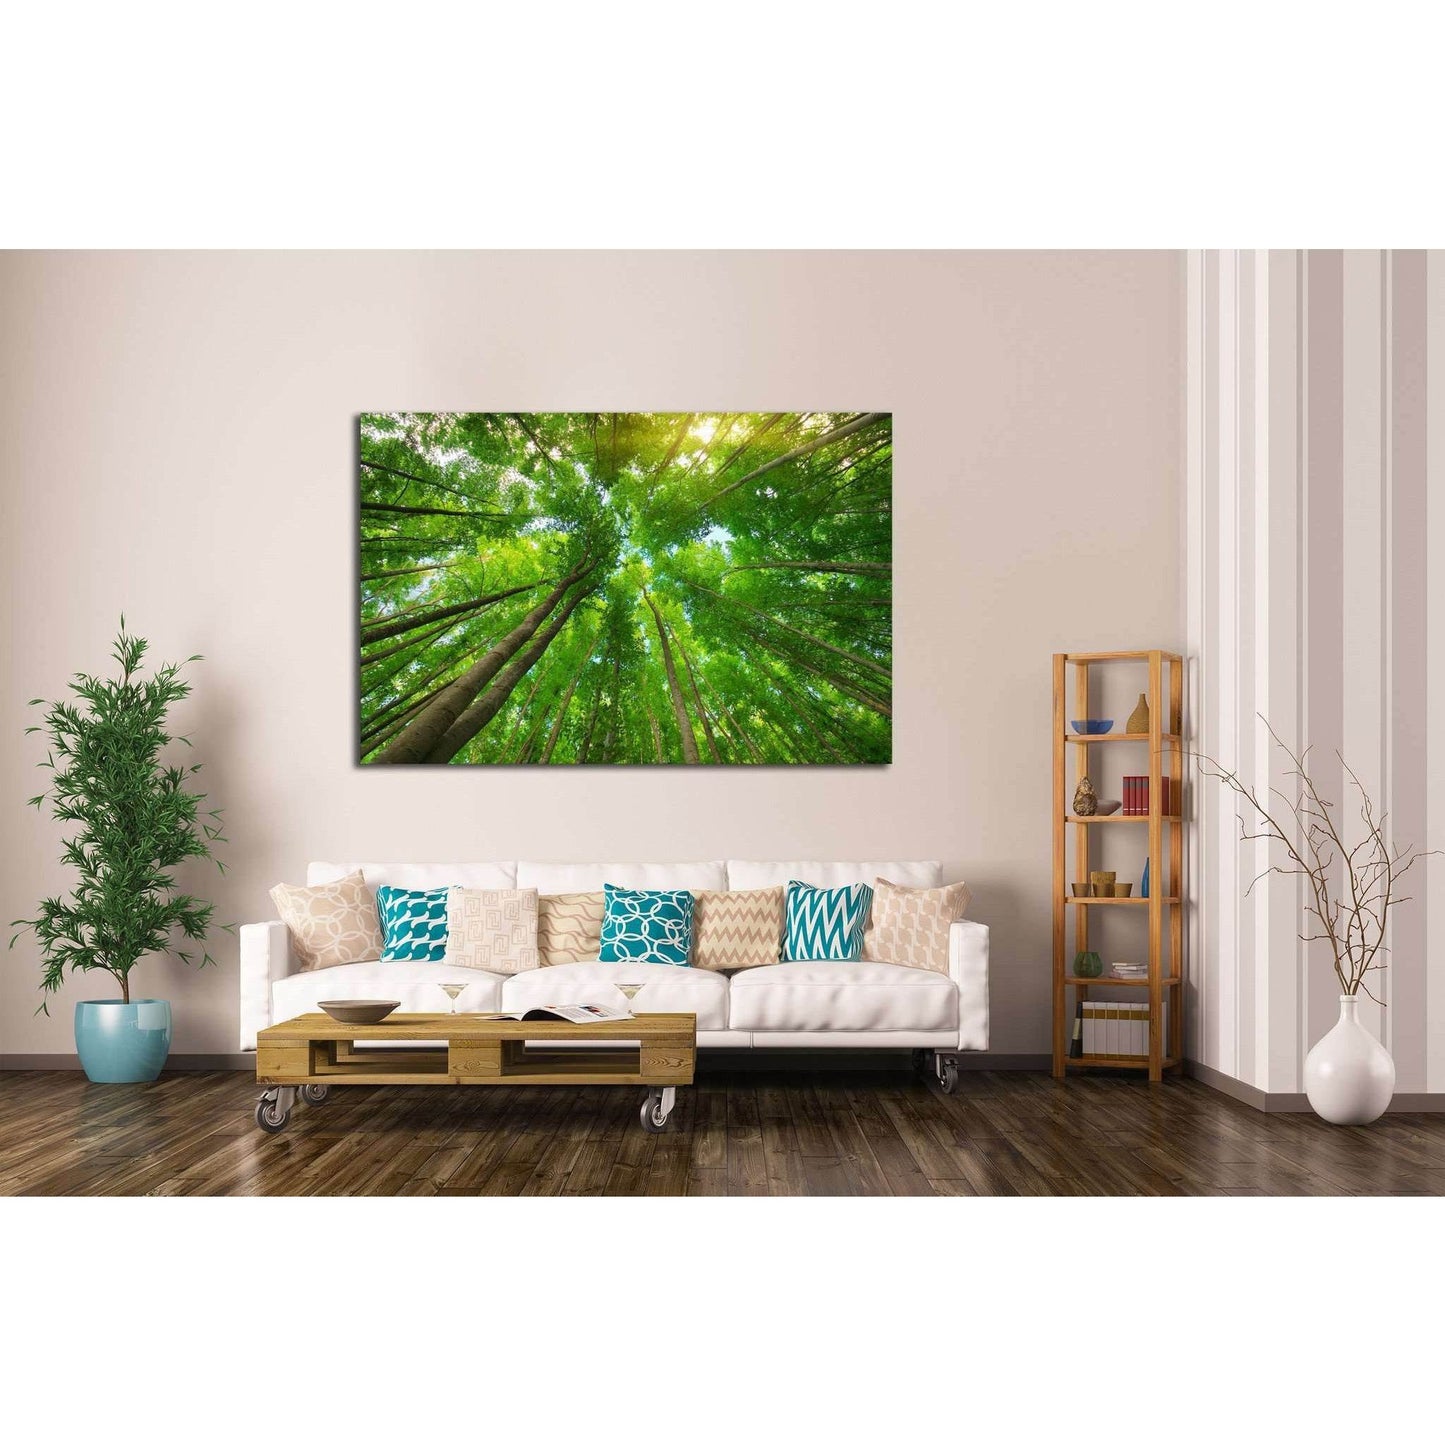 Forest Canopy Multi-Panel Canvas Art for Natural Home DecorThis multi-panel canvas print captures the towering majesty of a forest canopy. The perspective draws the eye upwards to the interplay of light and leaves, creating a lush green ambiance. Ideal fo